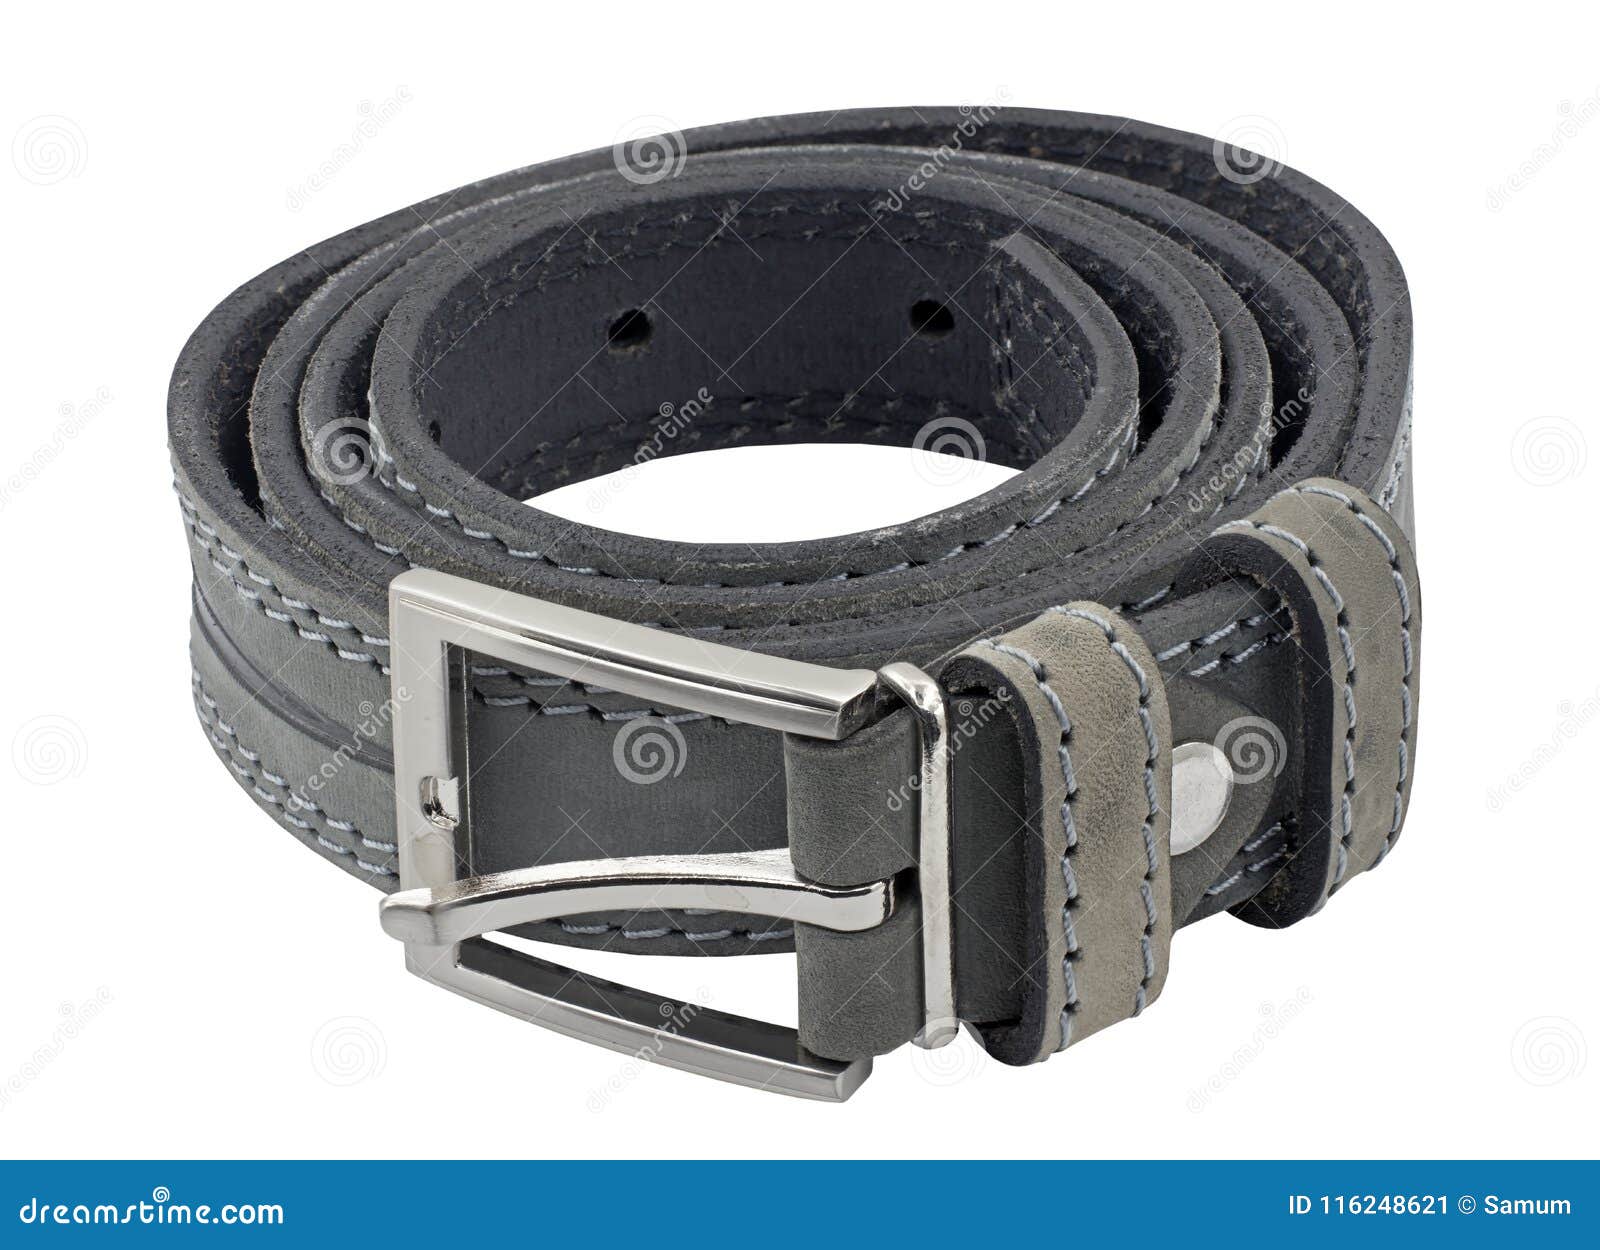 Rolled Mens Leather Belt With Metal Buckle Stock Image - Image of belt, clothing: 116248621